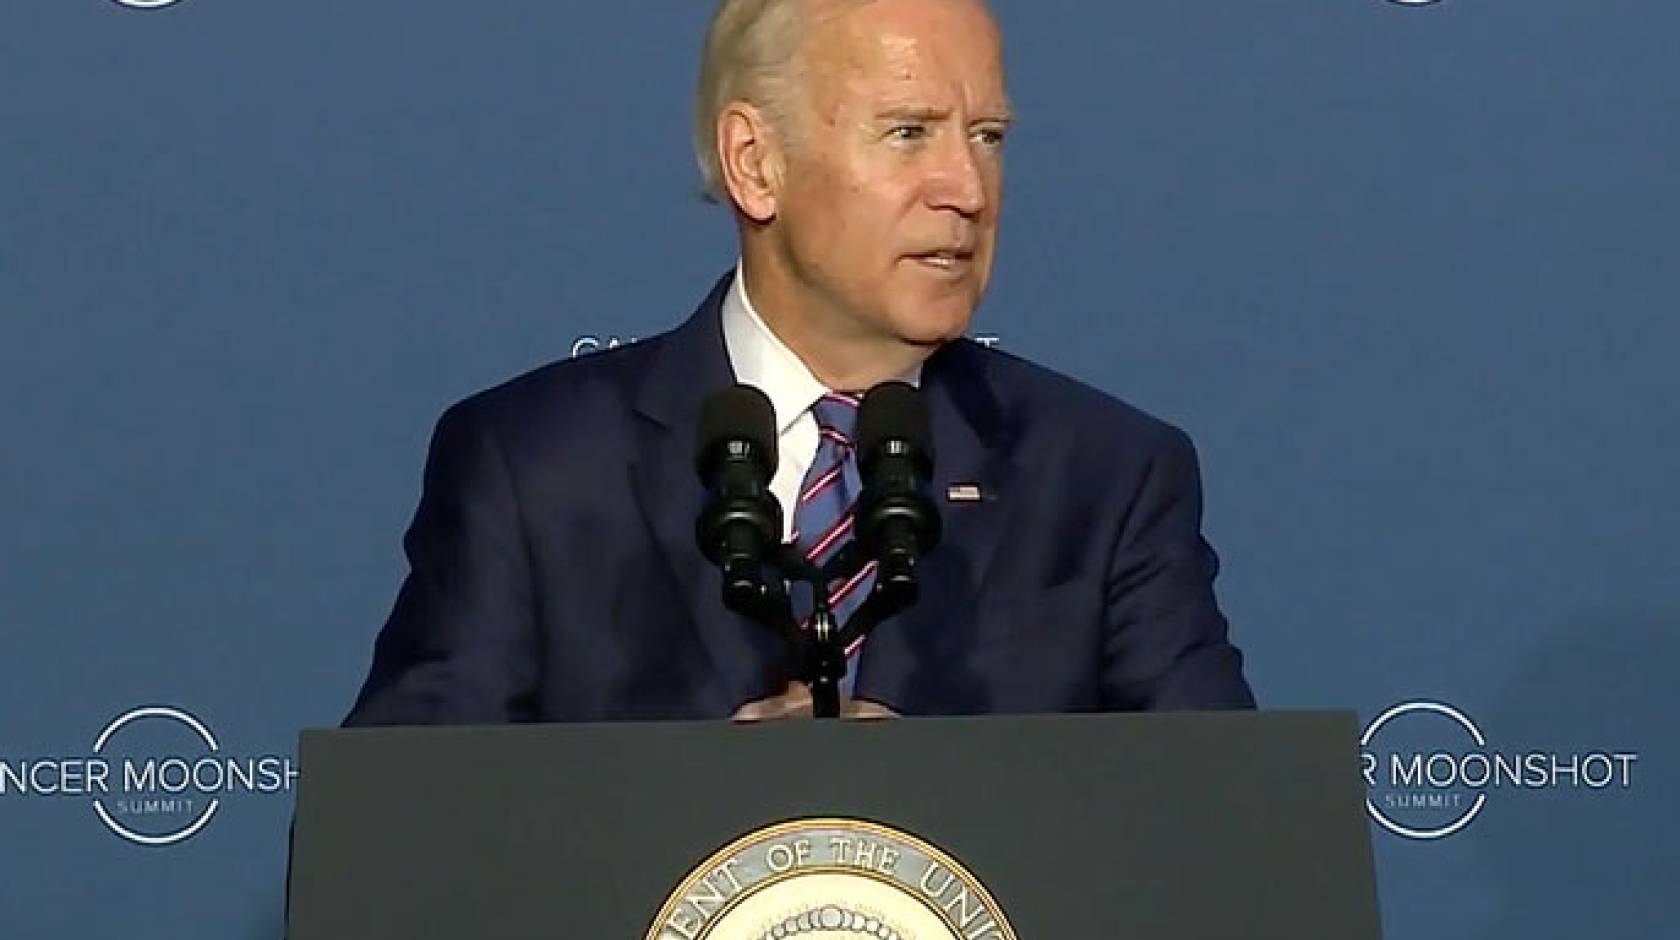 Vice President Joe Biden made the opening and closing remarks at Wednesday's White House Cancer Moonshot Summit.